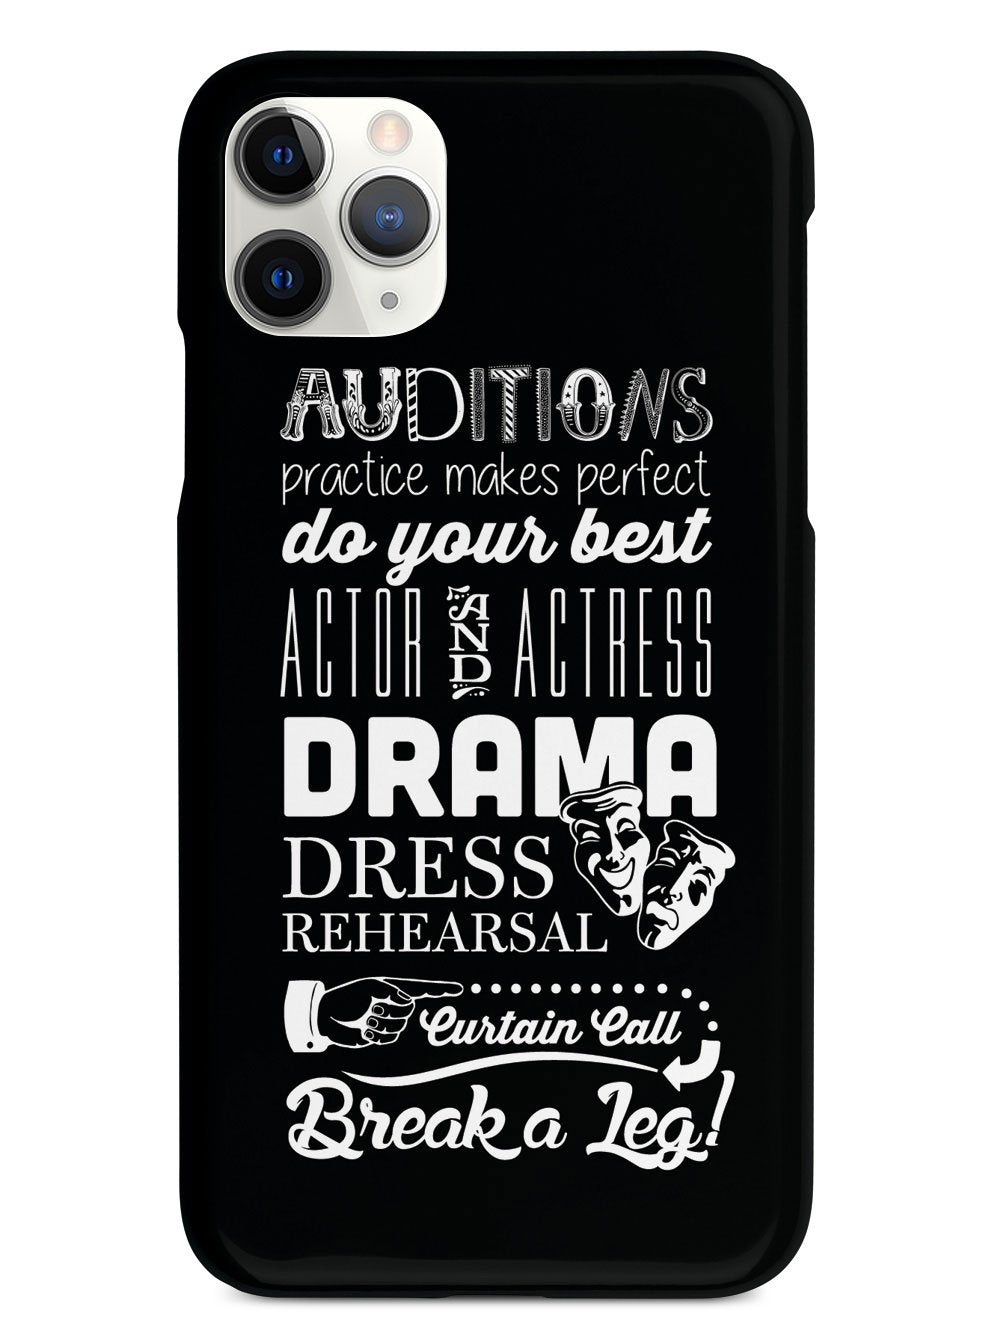 All About Drama Theater Case